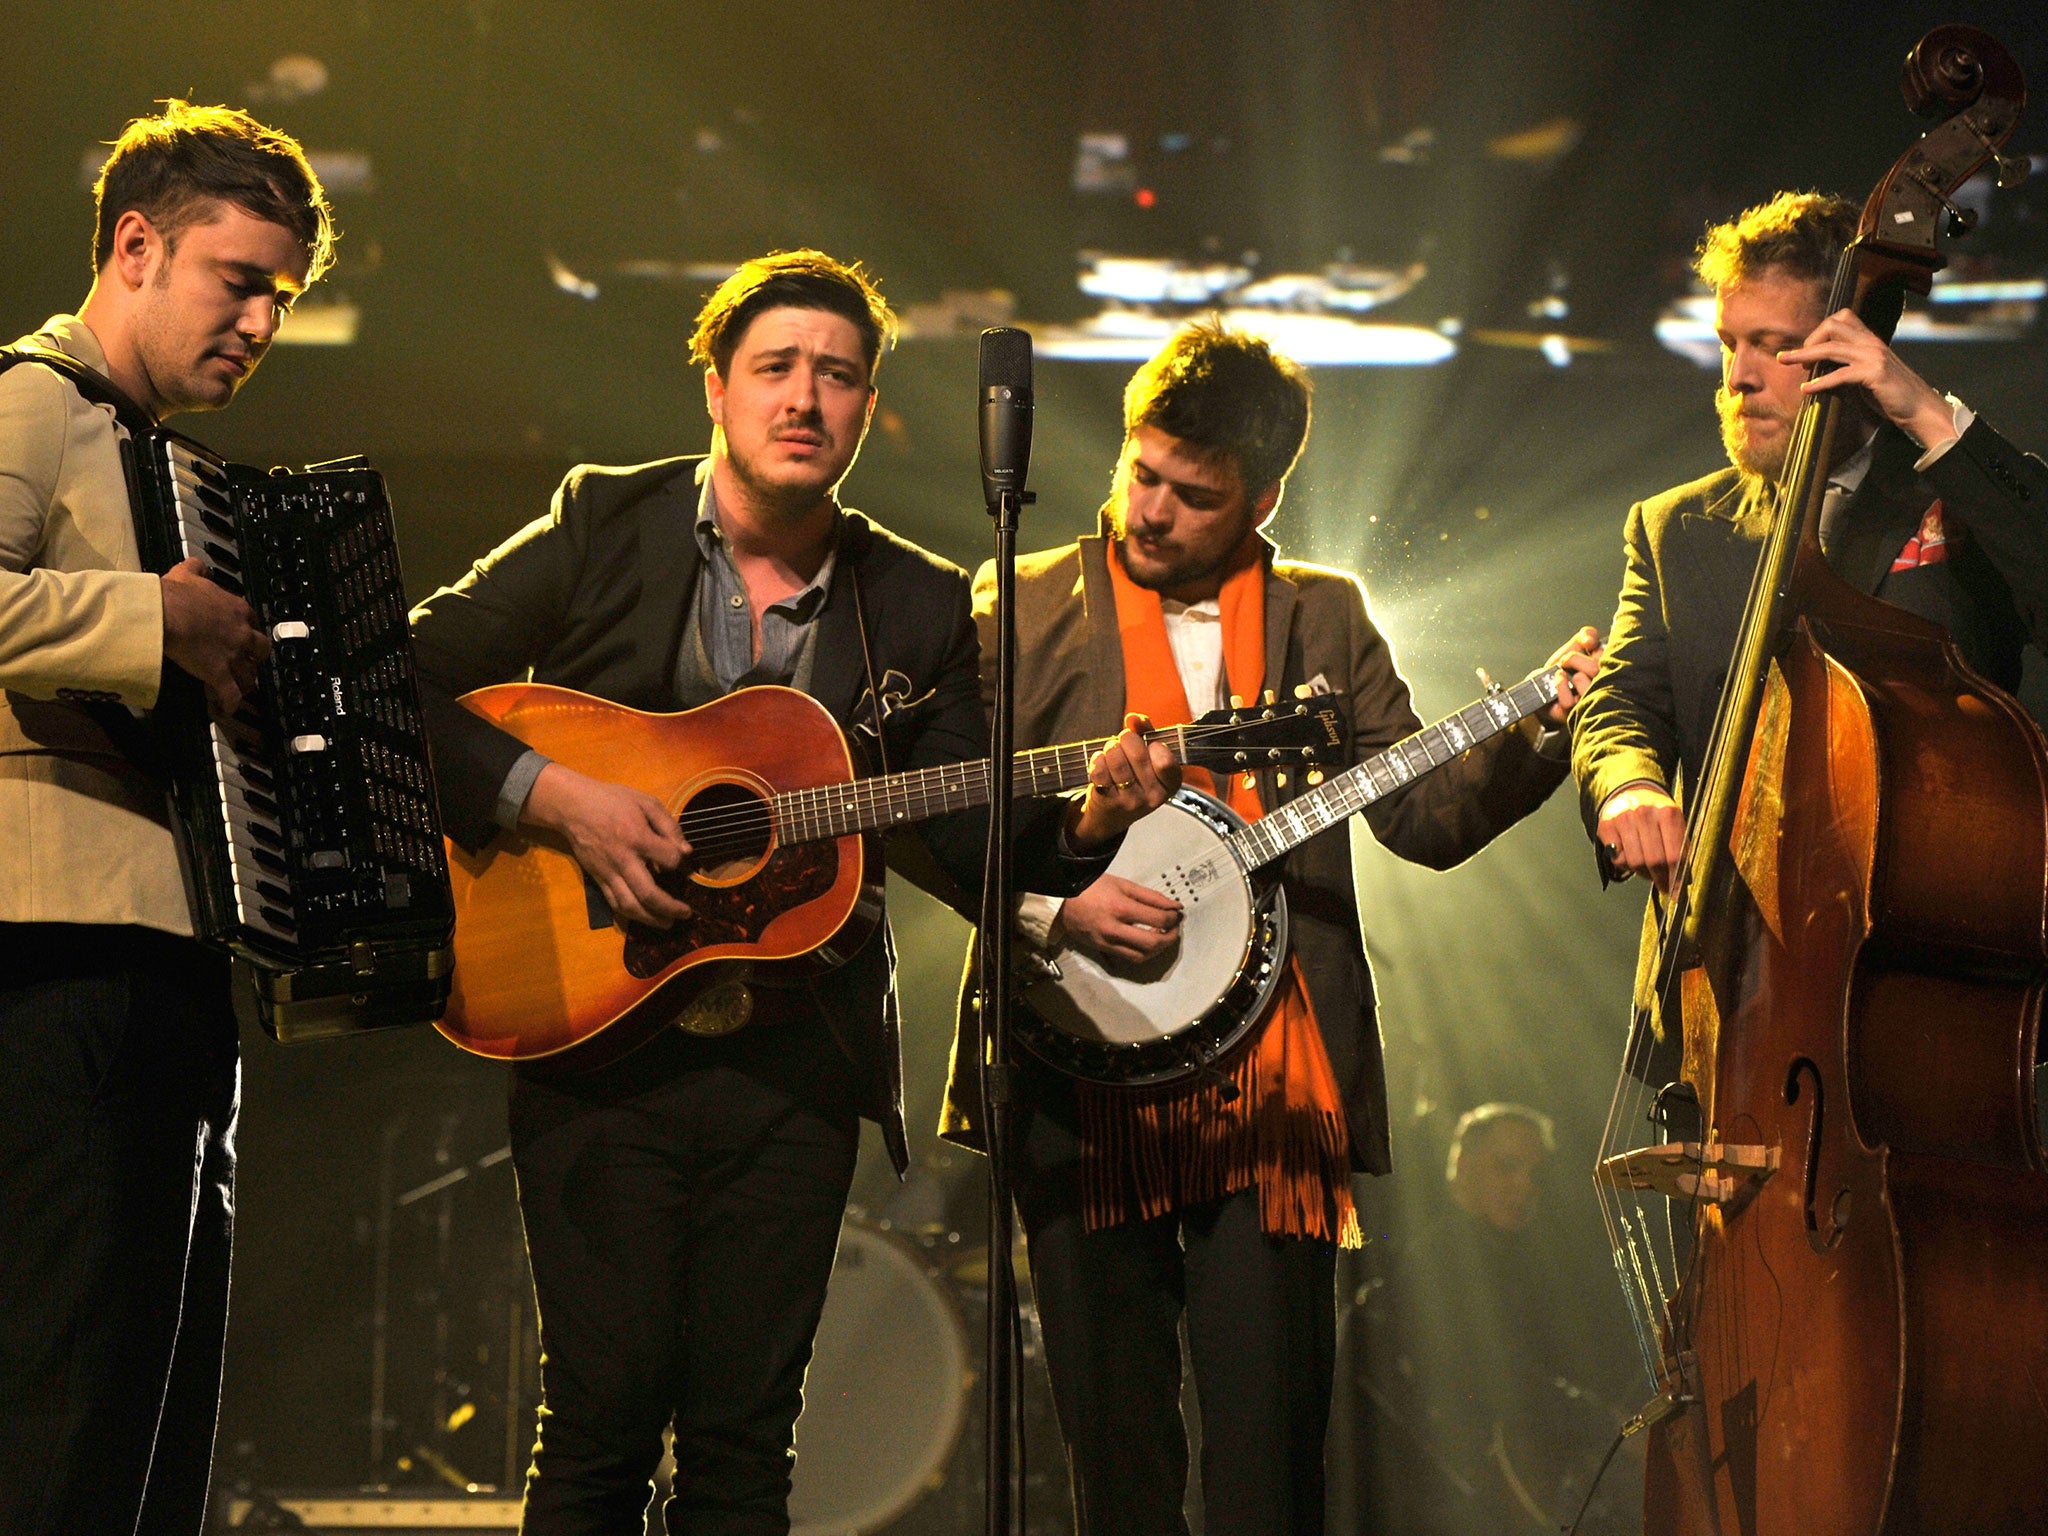 Mumford & Sons will not be joining Jay Z's Tidal streaming service anytime soon